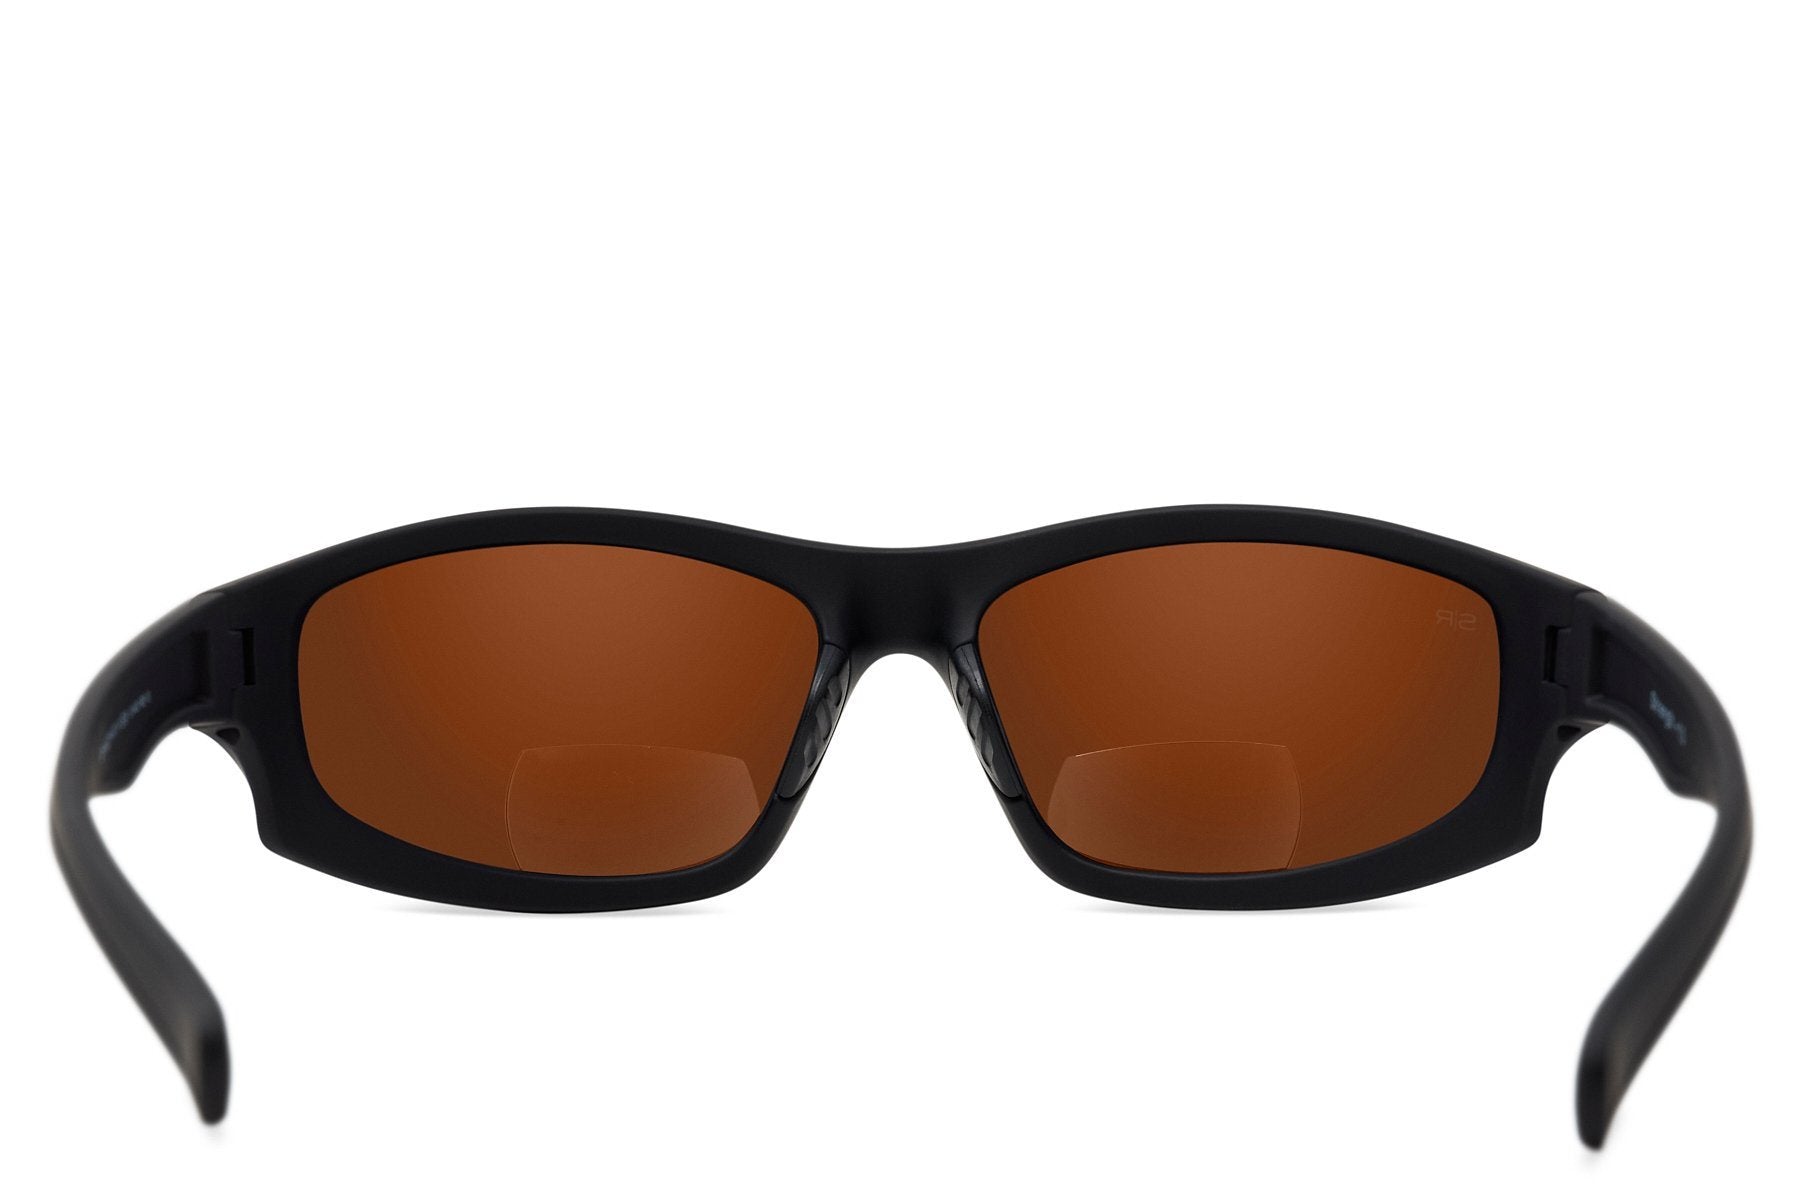  Polarized Sunglasses With Readers